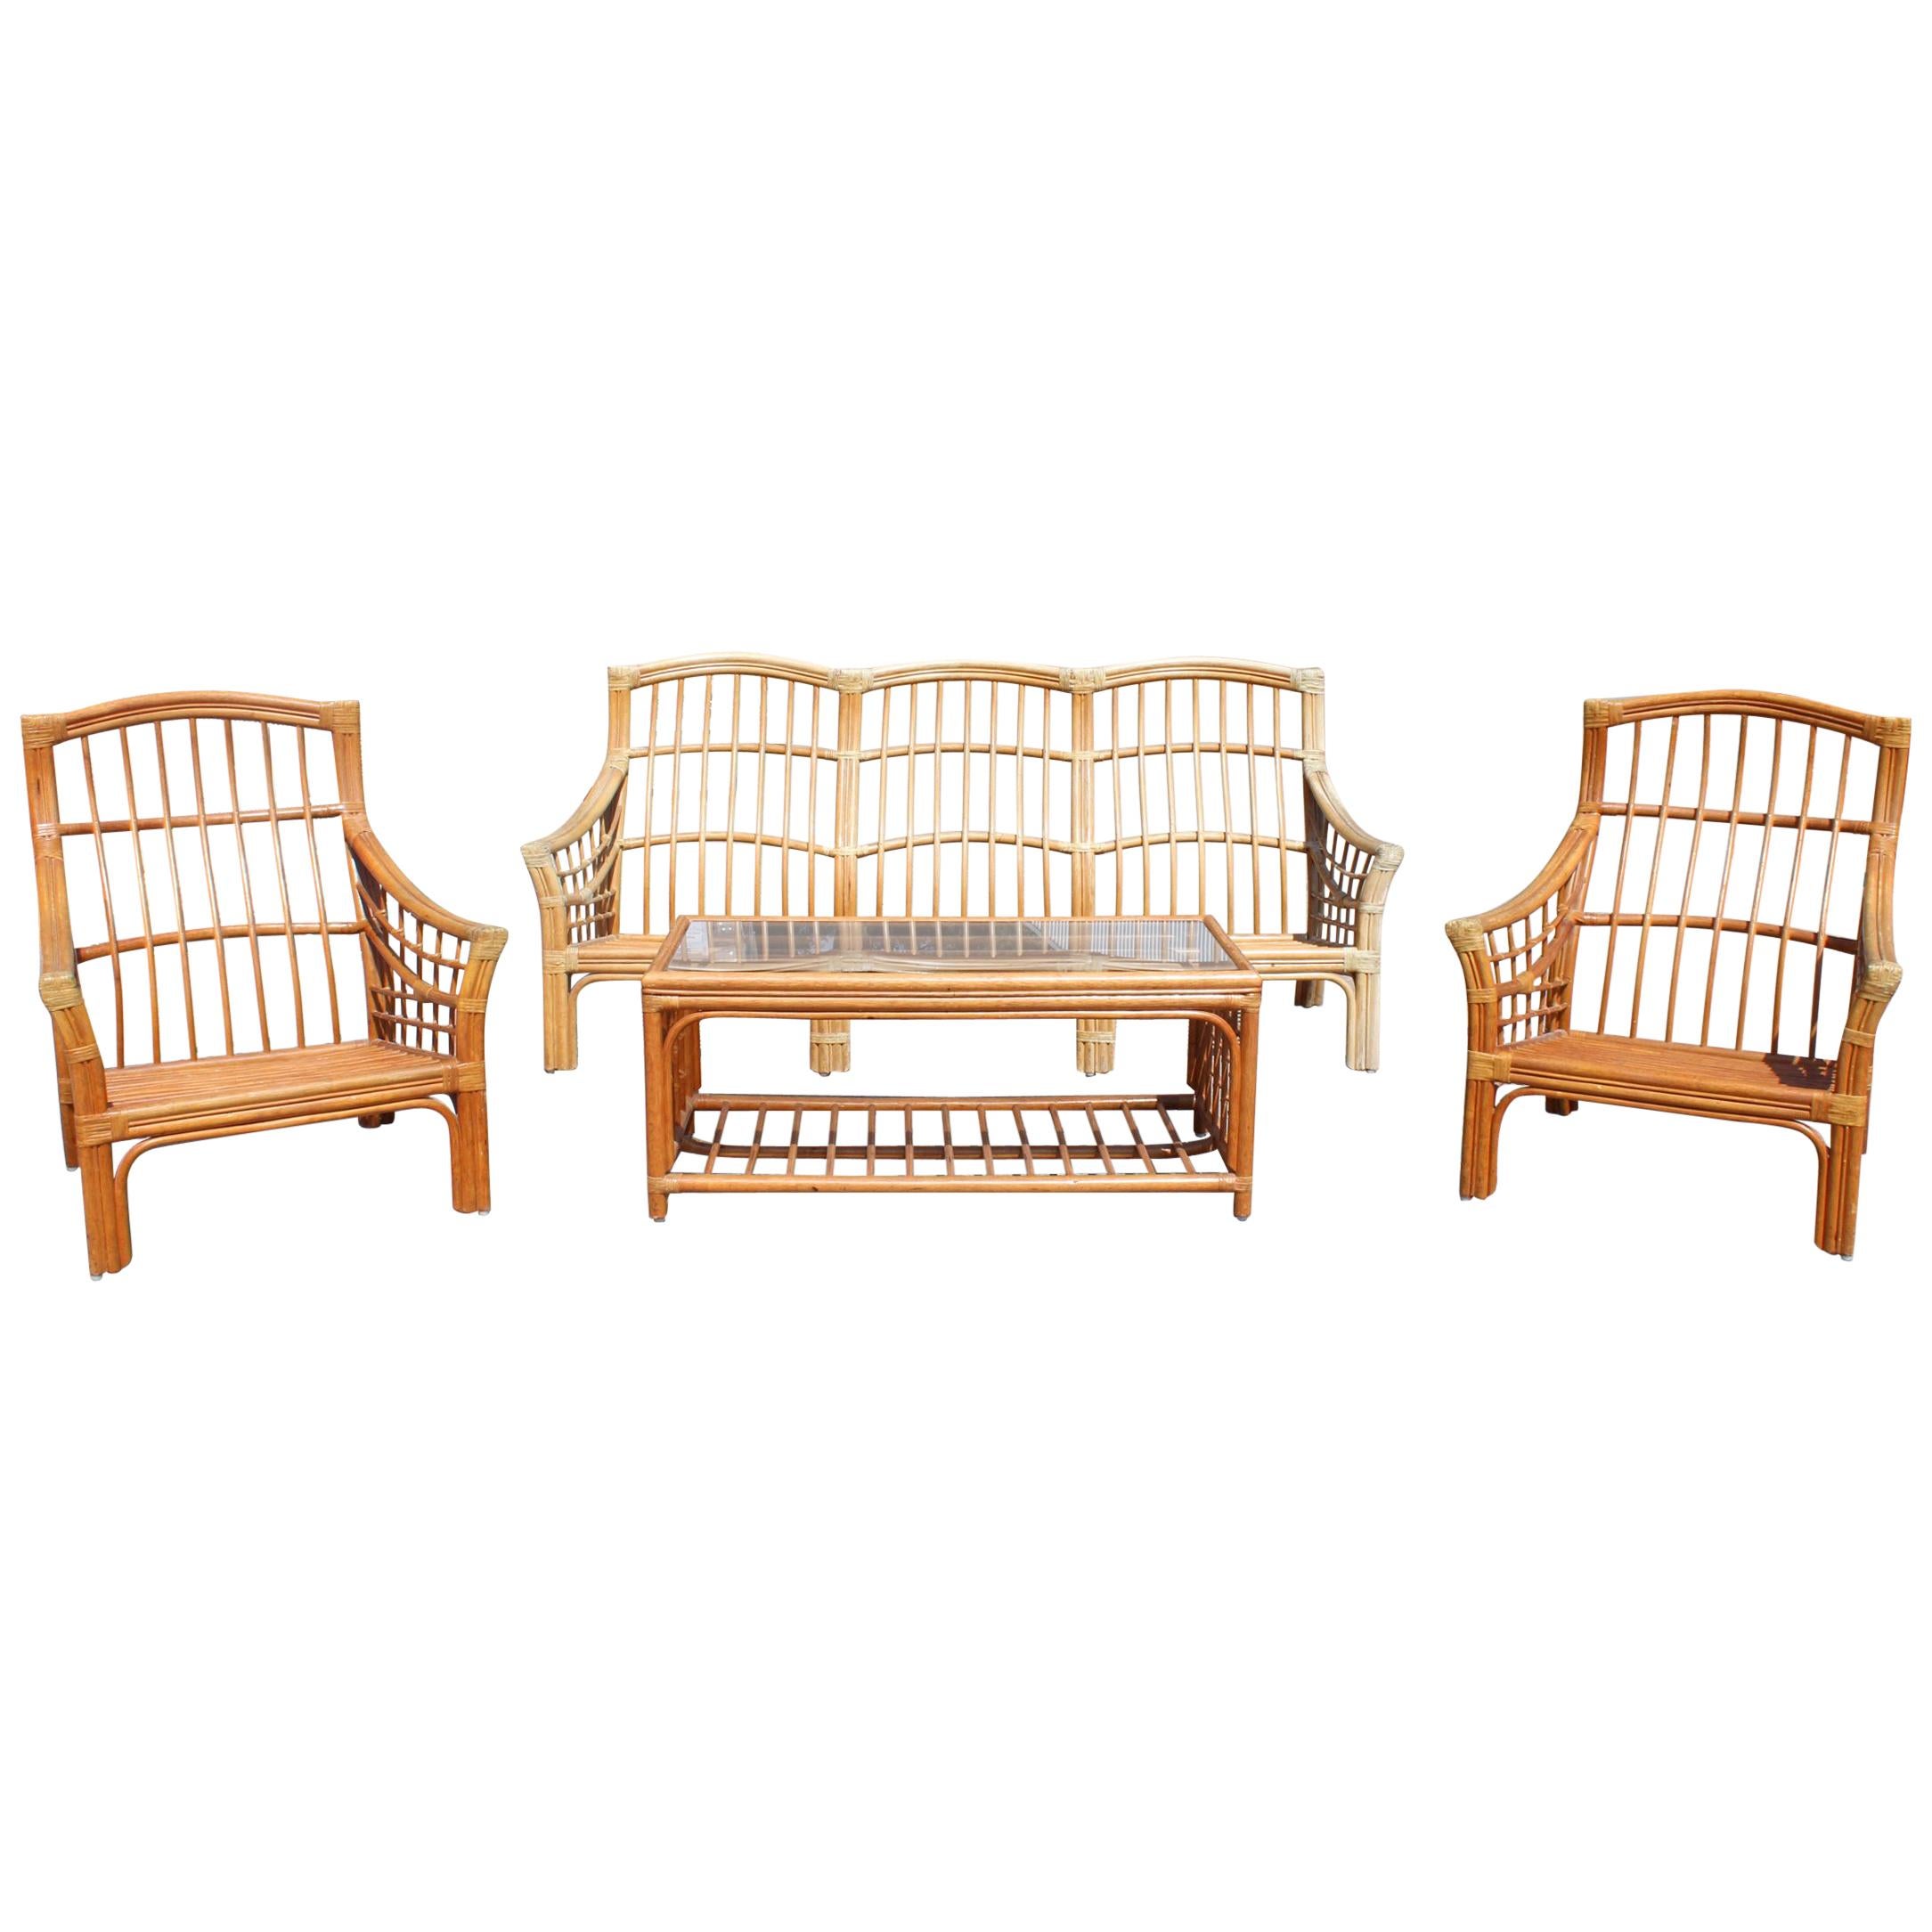 1980s Bamboo Garden Furniture Set For Sale at 1stDibs